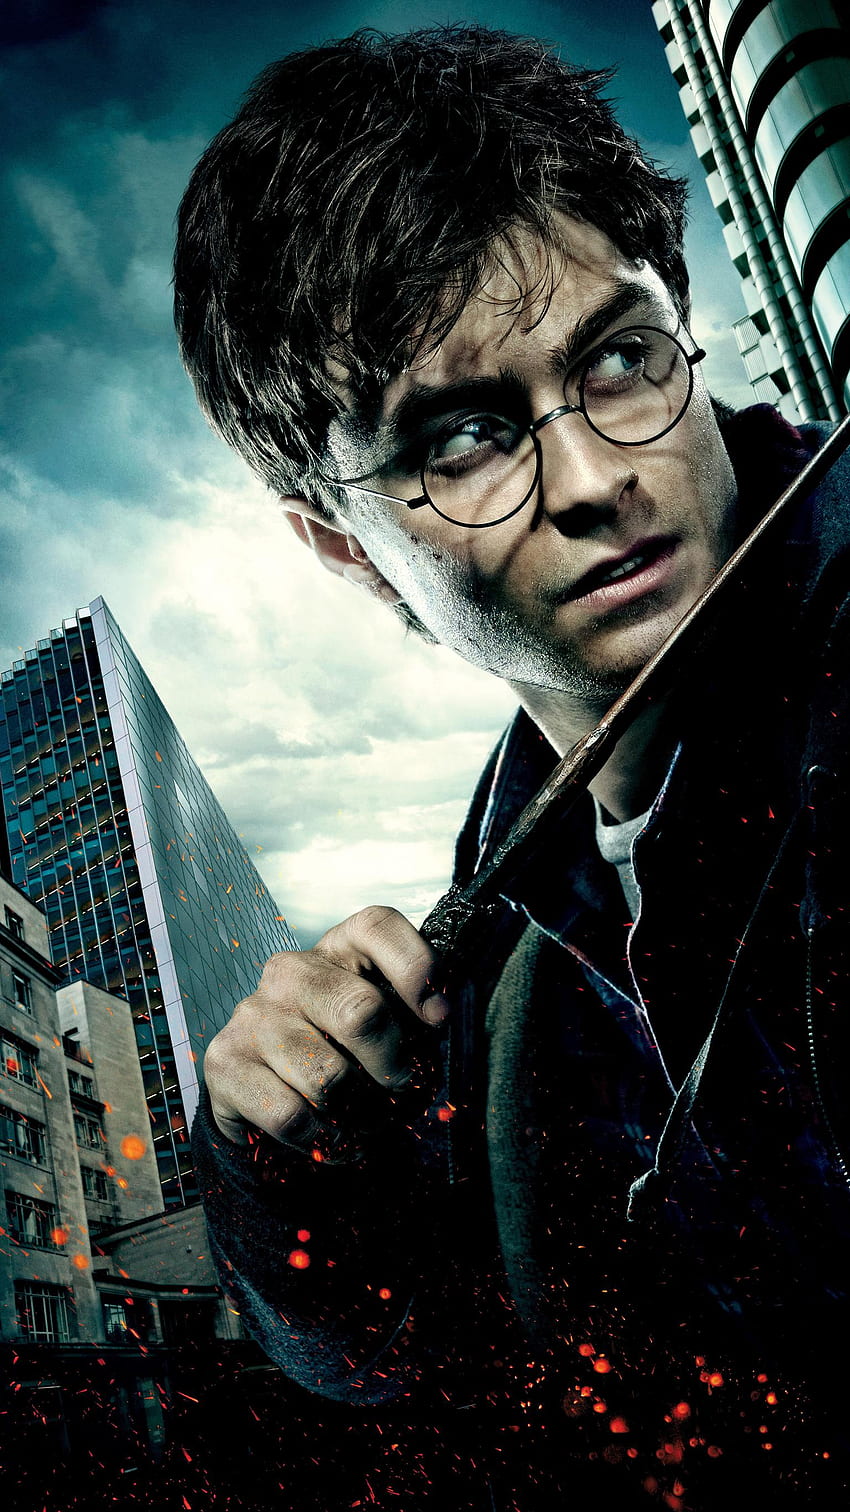 Harry Potter and the Deathly Hallows: Part 1 (2022) movie HD phone wallpaper